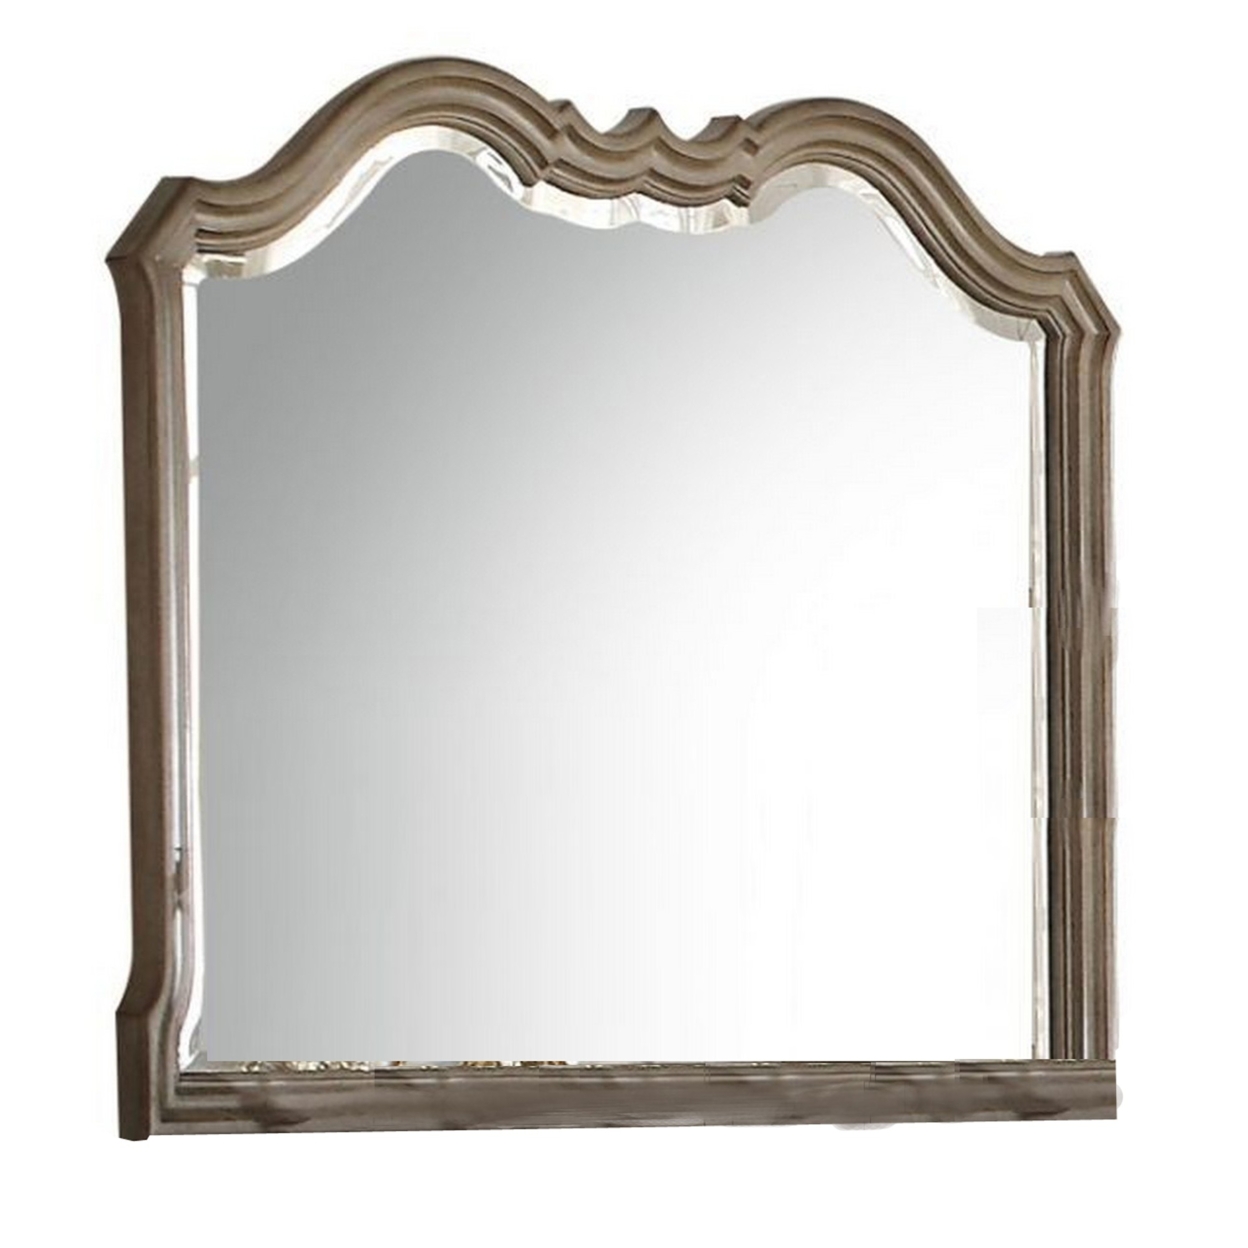 Wooden Molded Frame Mirror With Scalloped Design Top, Taupe Brown- Saltoro Sherpi